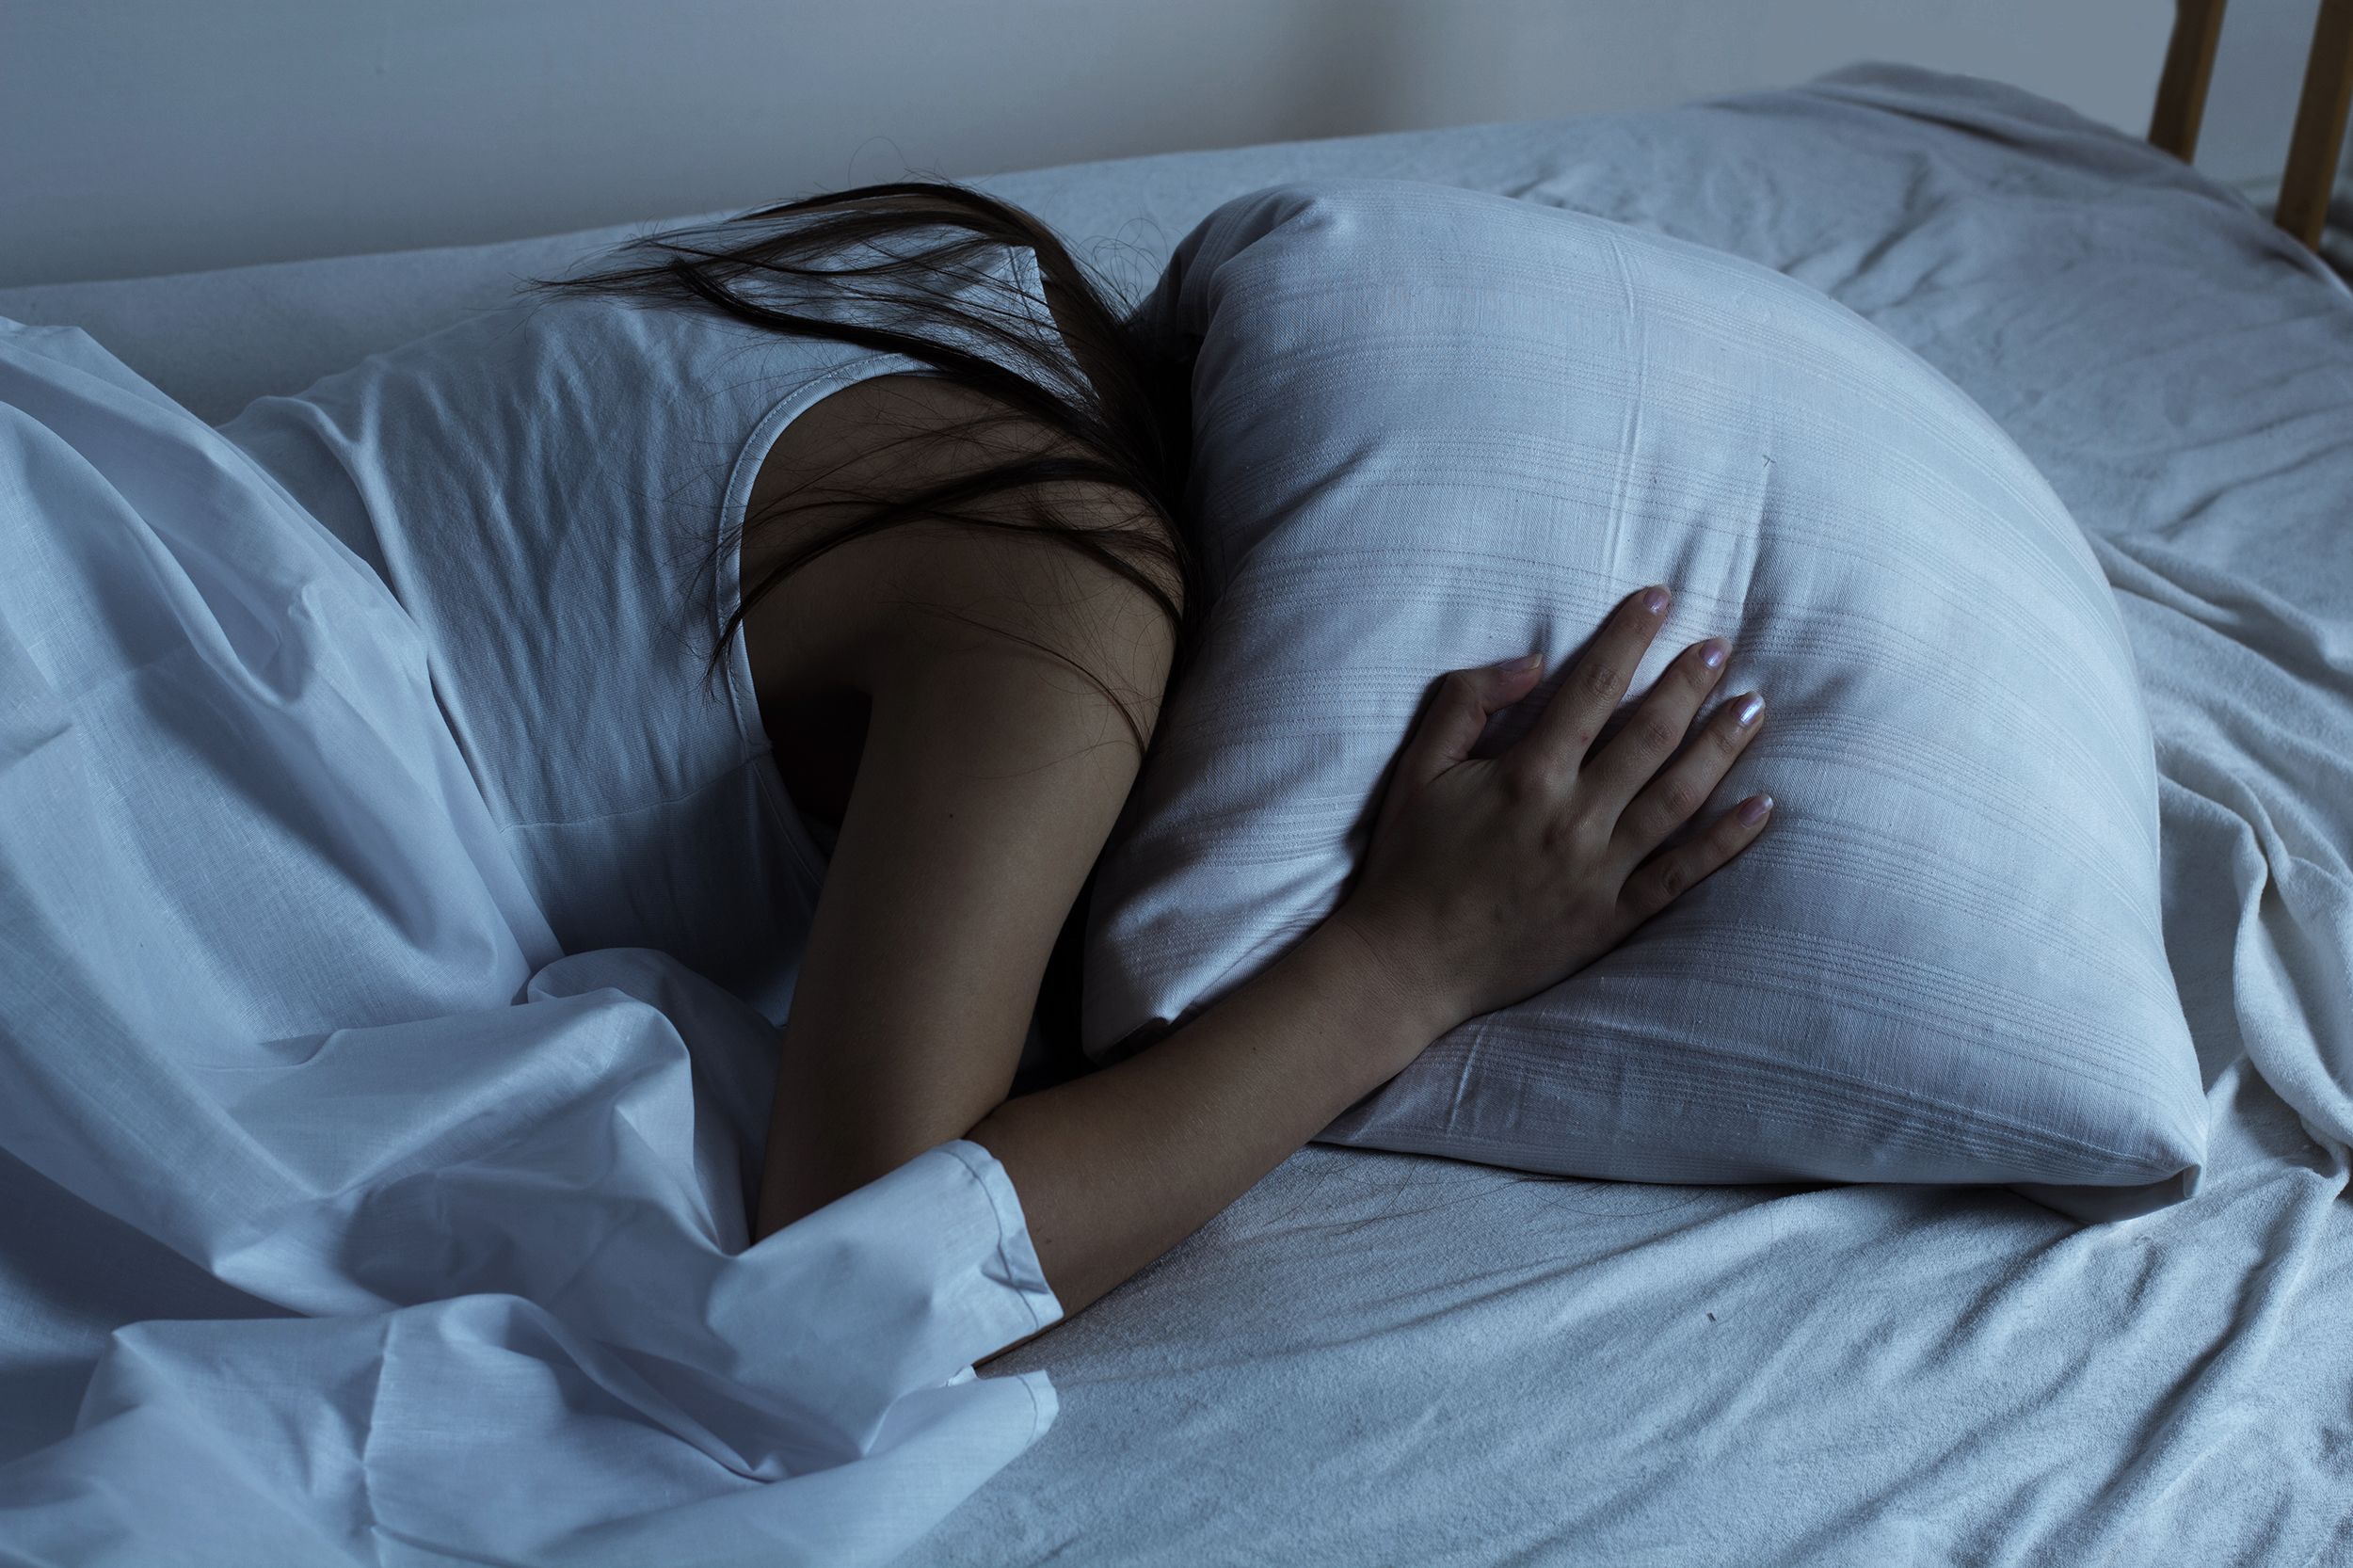 Insomnia: How the pandemic is affecting your sleep | CNN